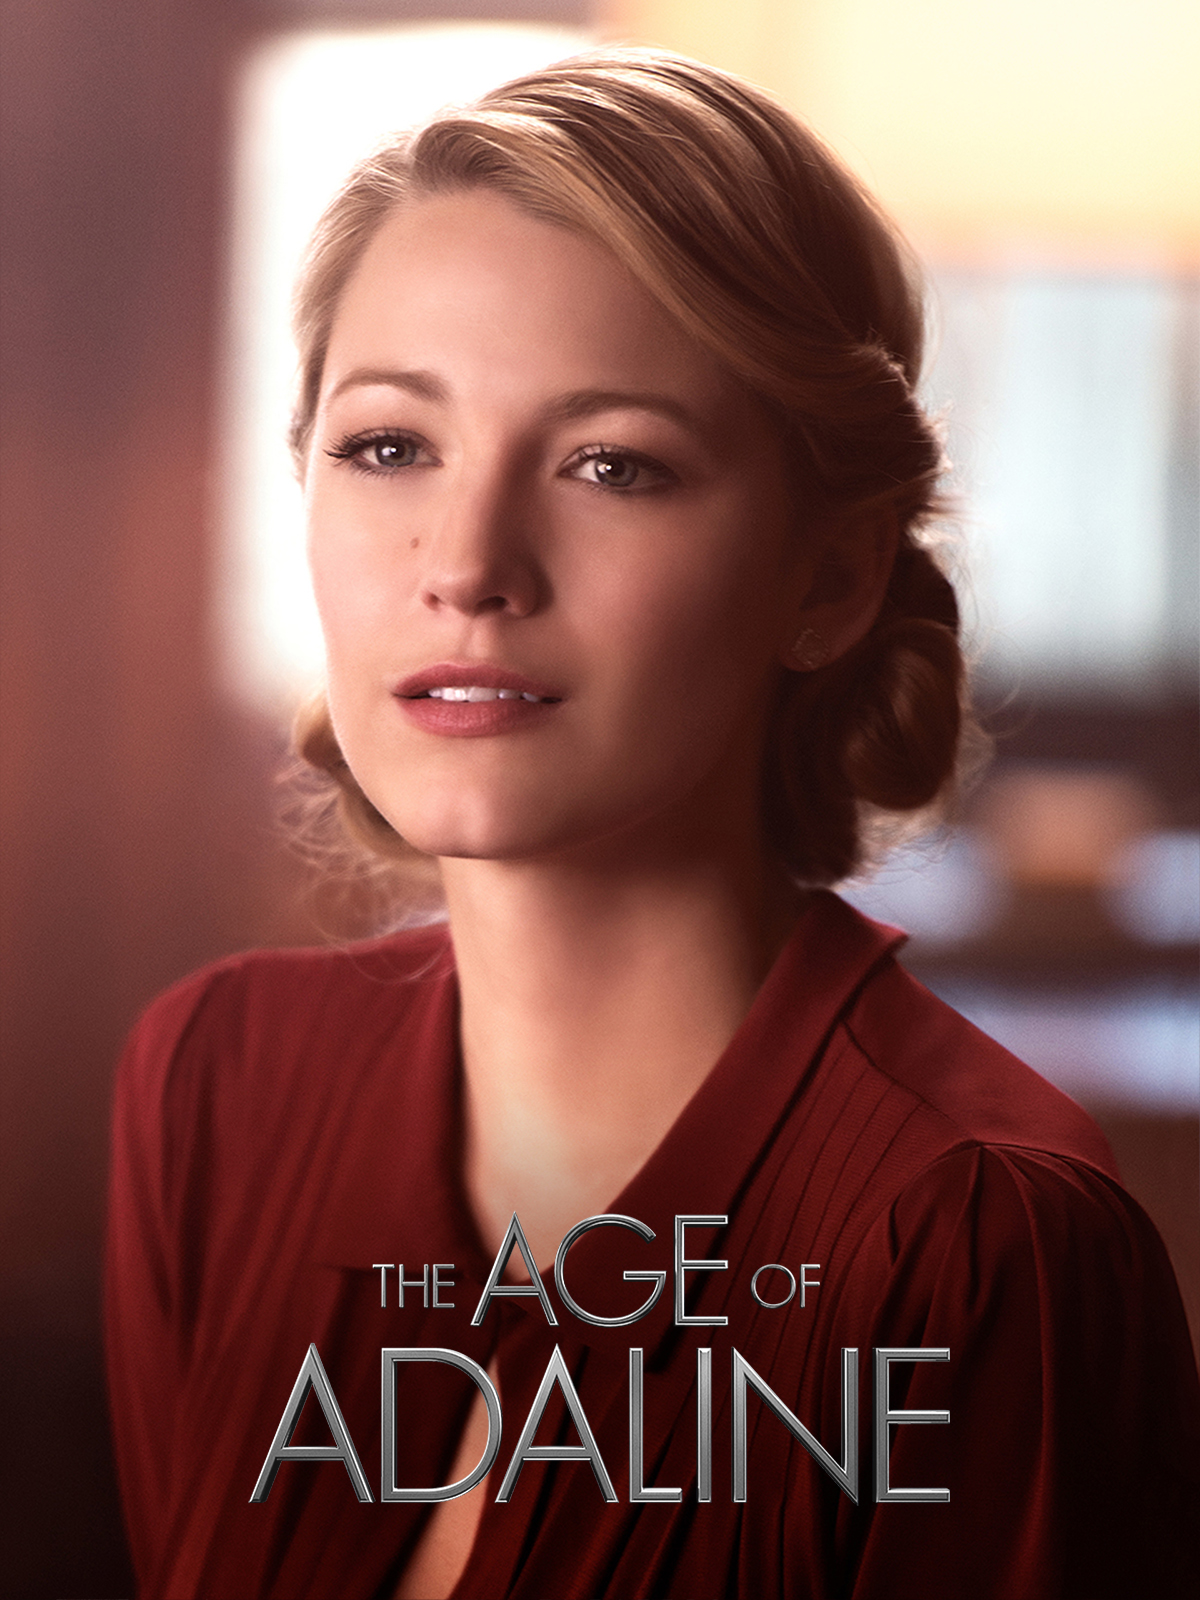 The Age of Adaline (2015) ★★★★☆